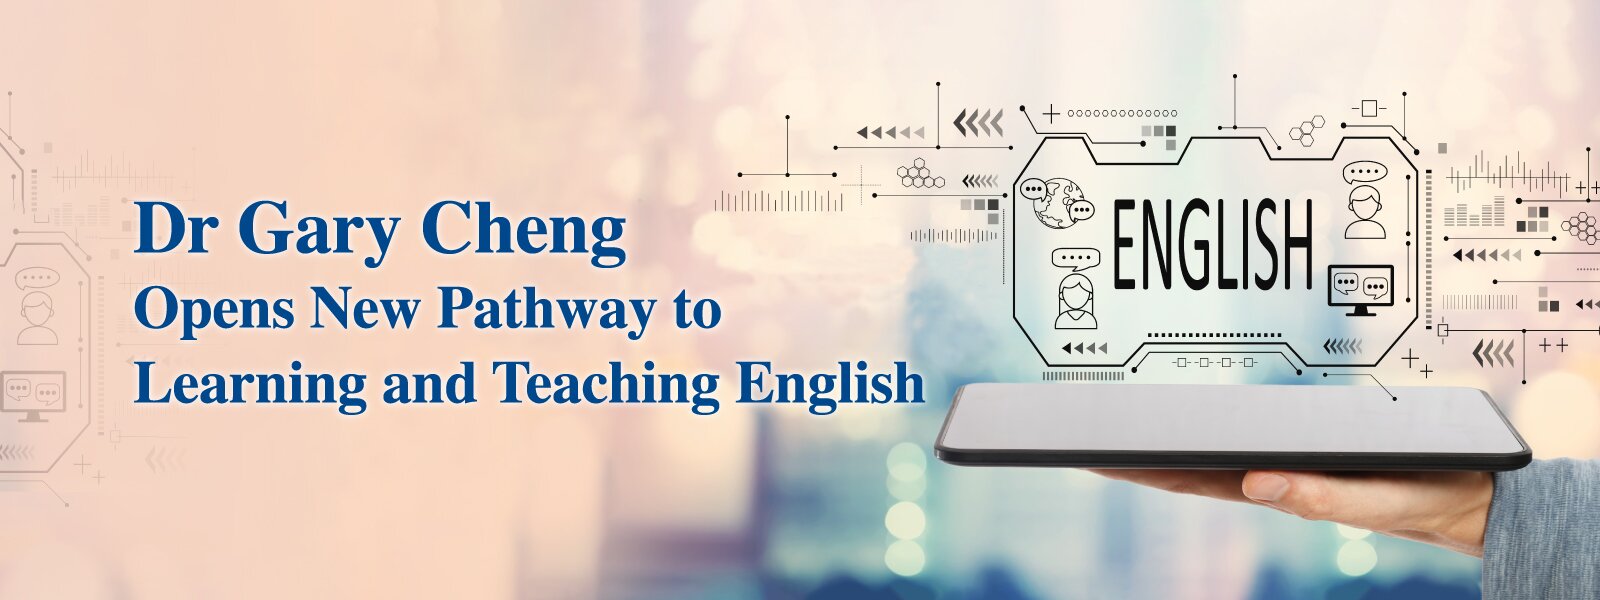 Dr Gary Cheng Opens New Pathway to Learning and Teaching English